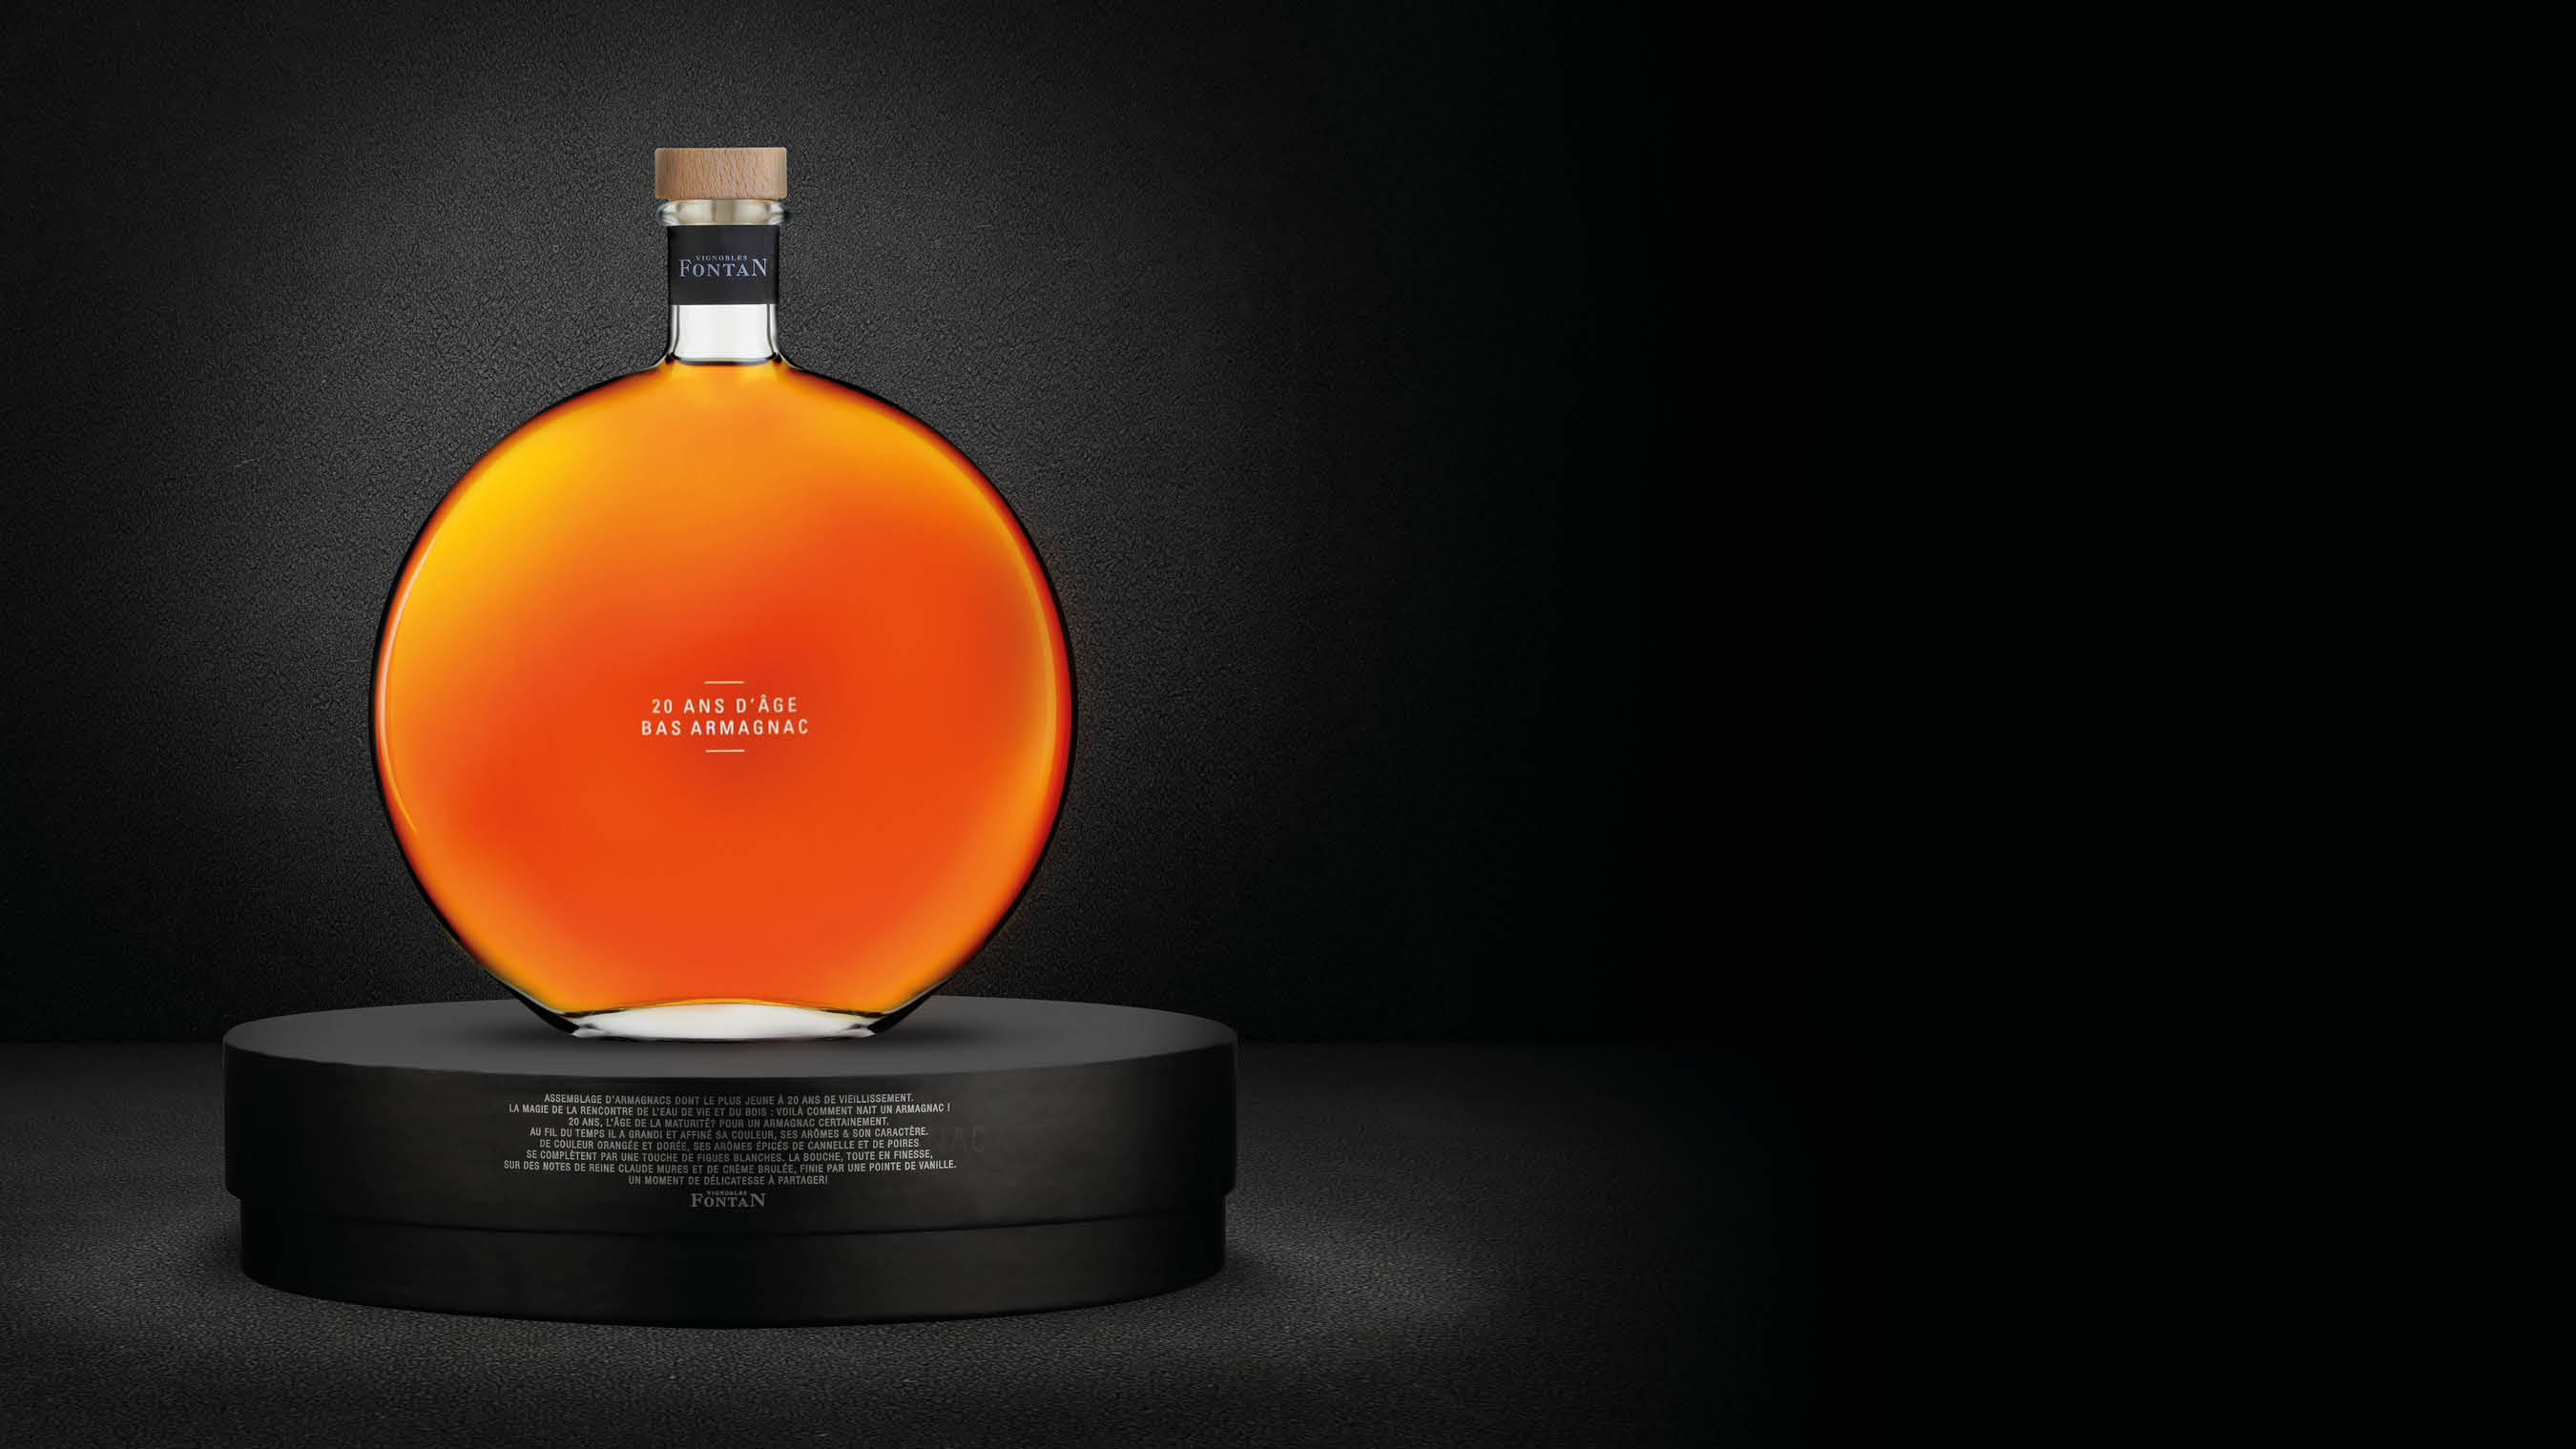 Astonishing aged Armagnac pours from Maison Fontan